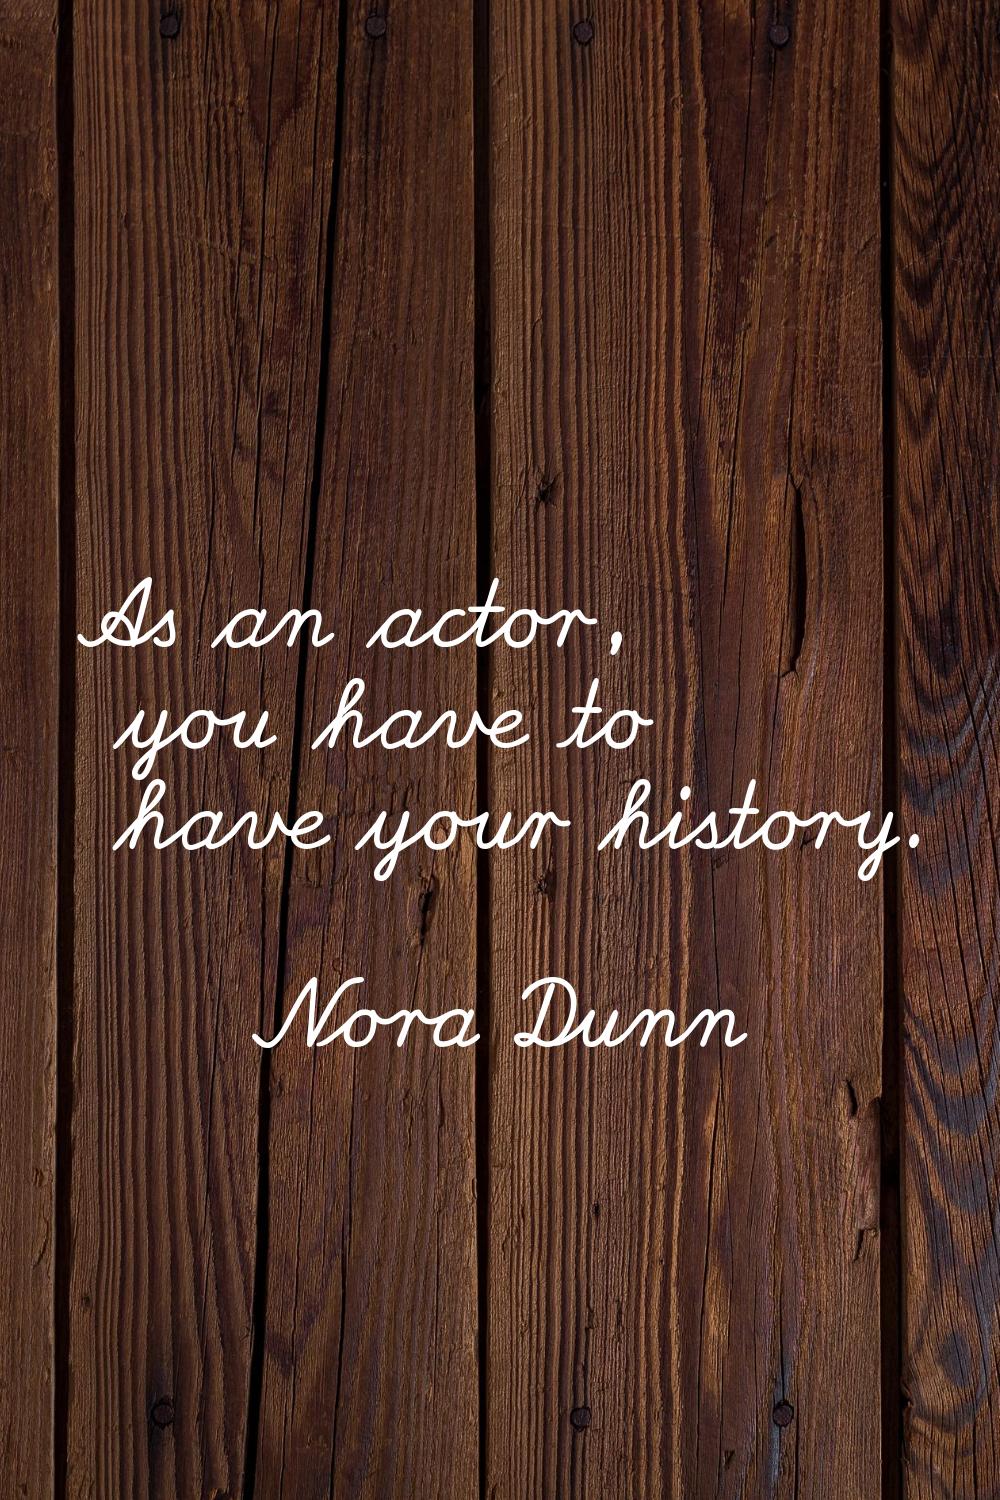 As an actor, you have to have your history.